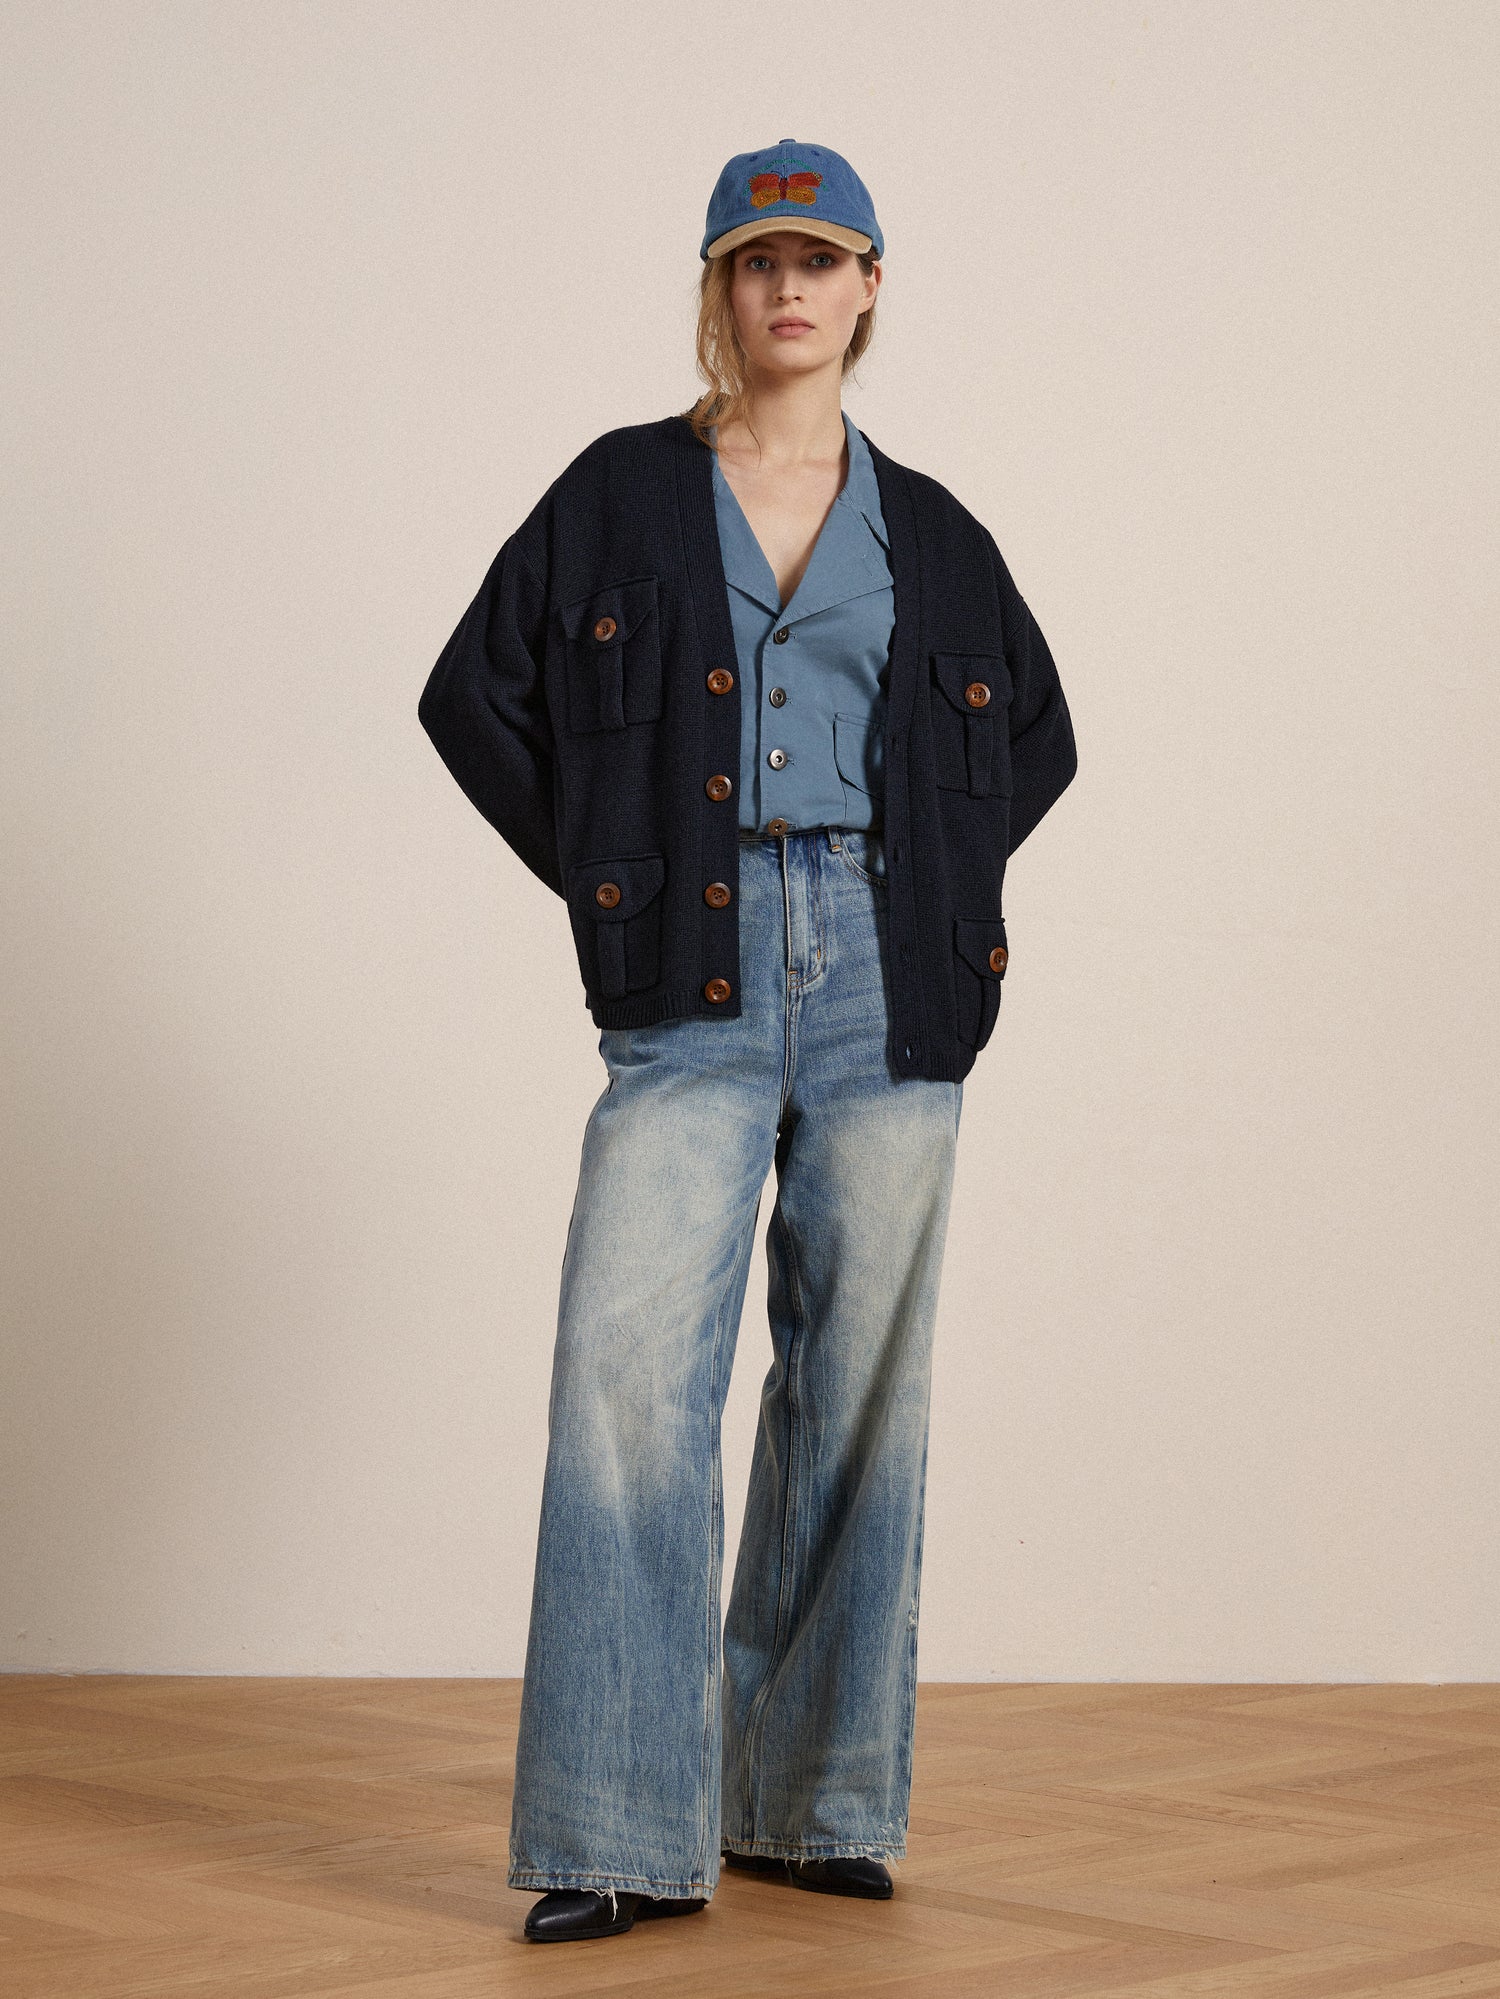 A woman in blue jeans and a Found Multi Pocket Cardigan with wooden buttons is standing on a wooden floor.